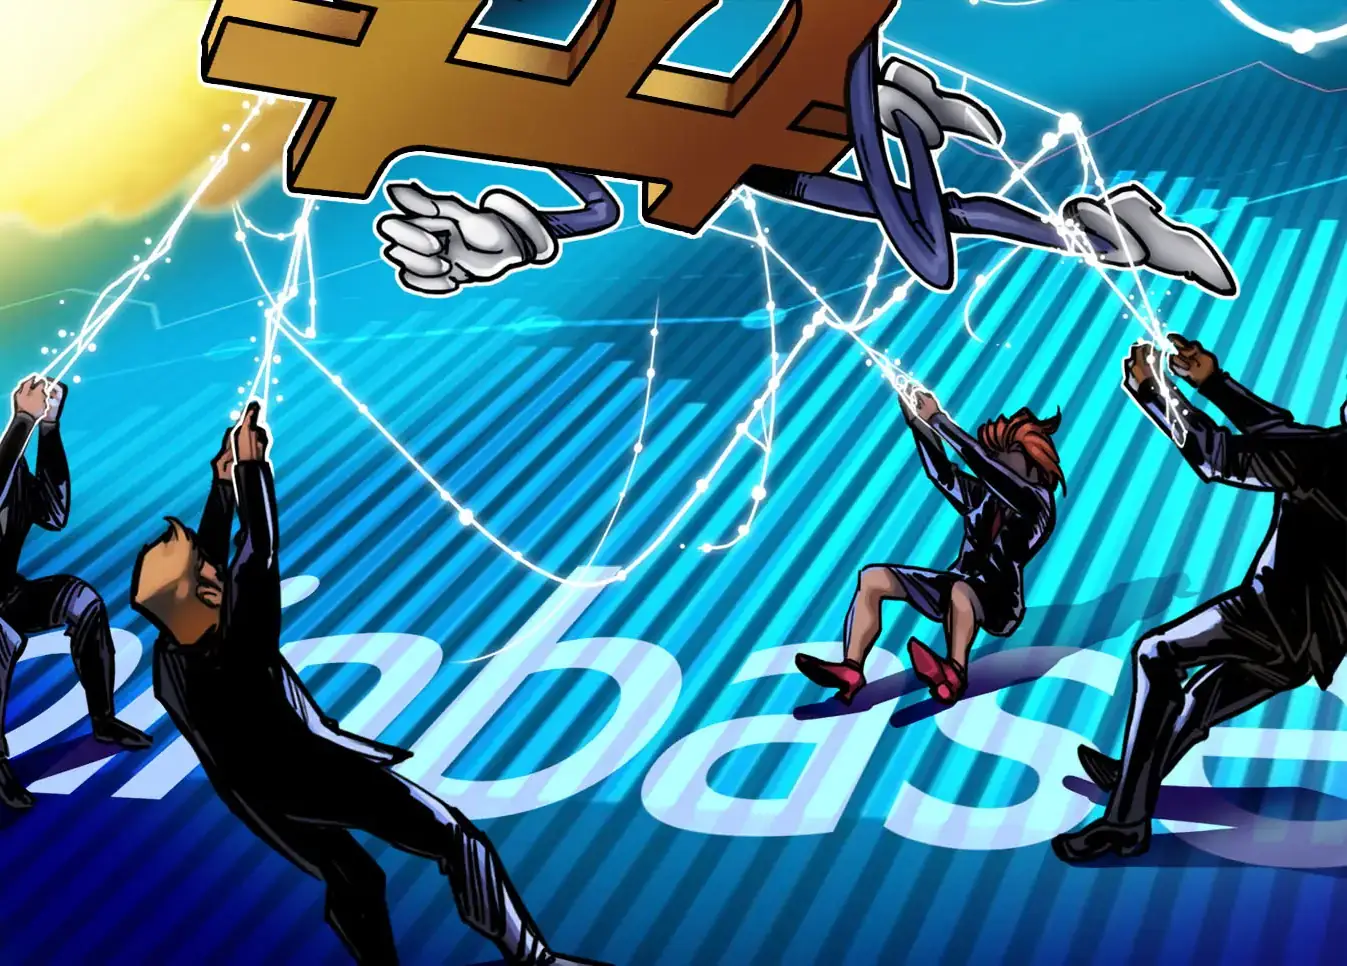 Bitcoin Holdings on Coinbase Hit Nine-Year Low as Whales Transfer $1 Billion Worth of BTC